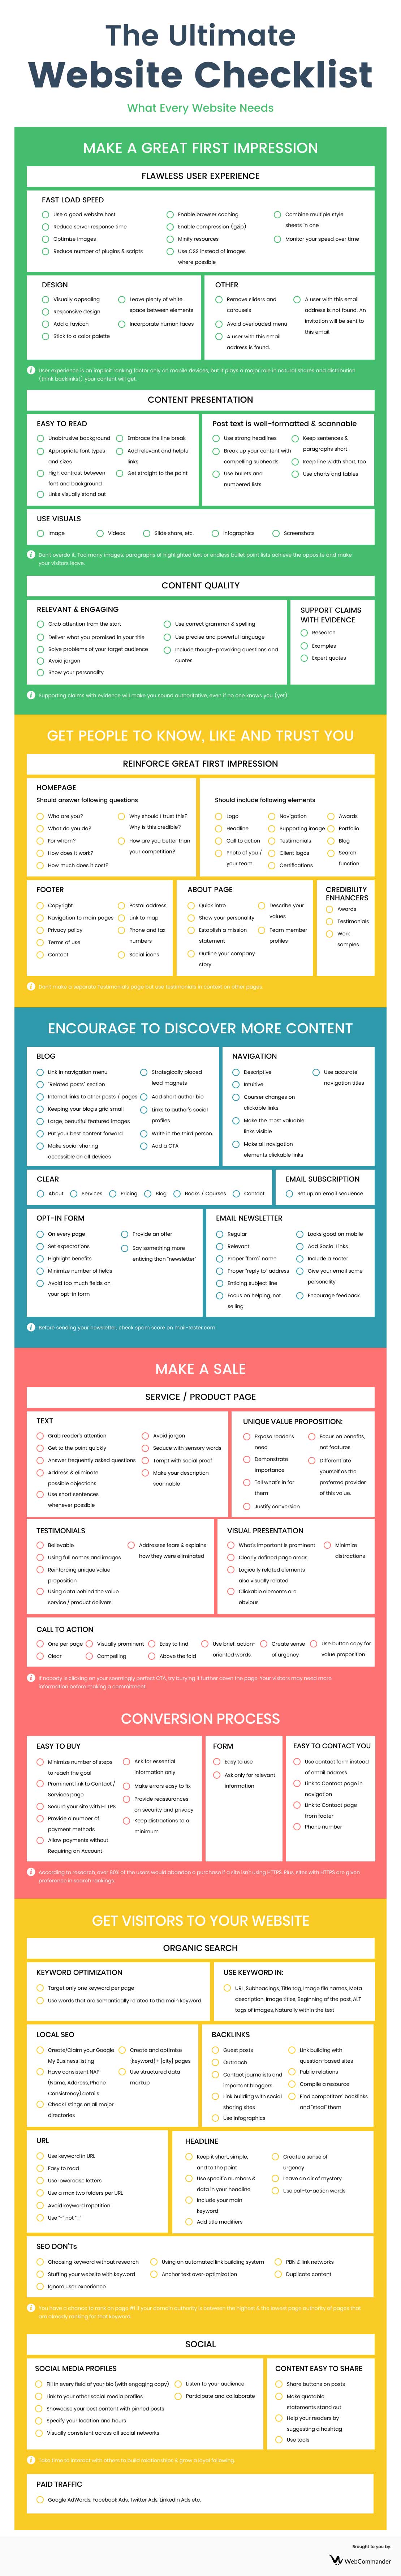 The-Ultimate-Website-Checklist-What-Every-Website-Needs